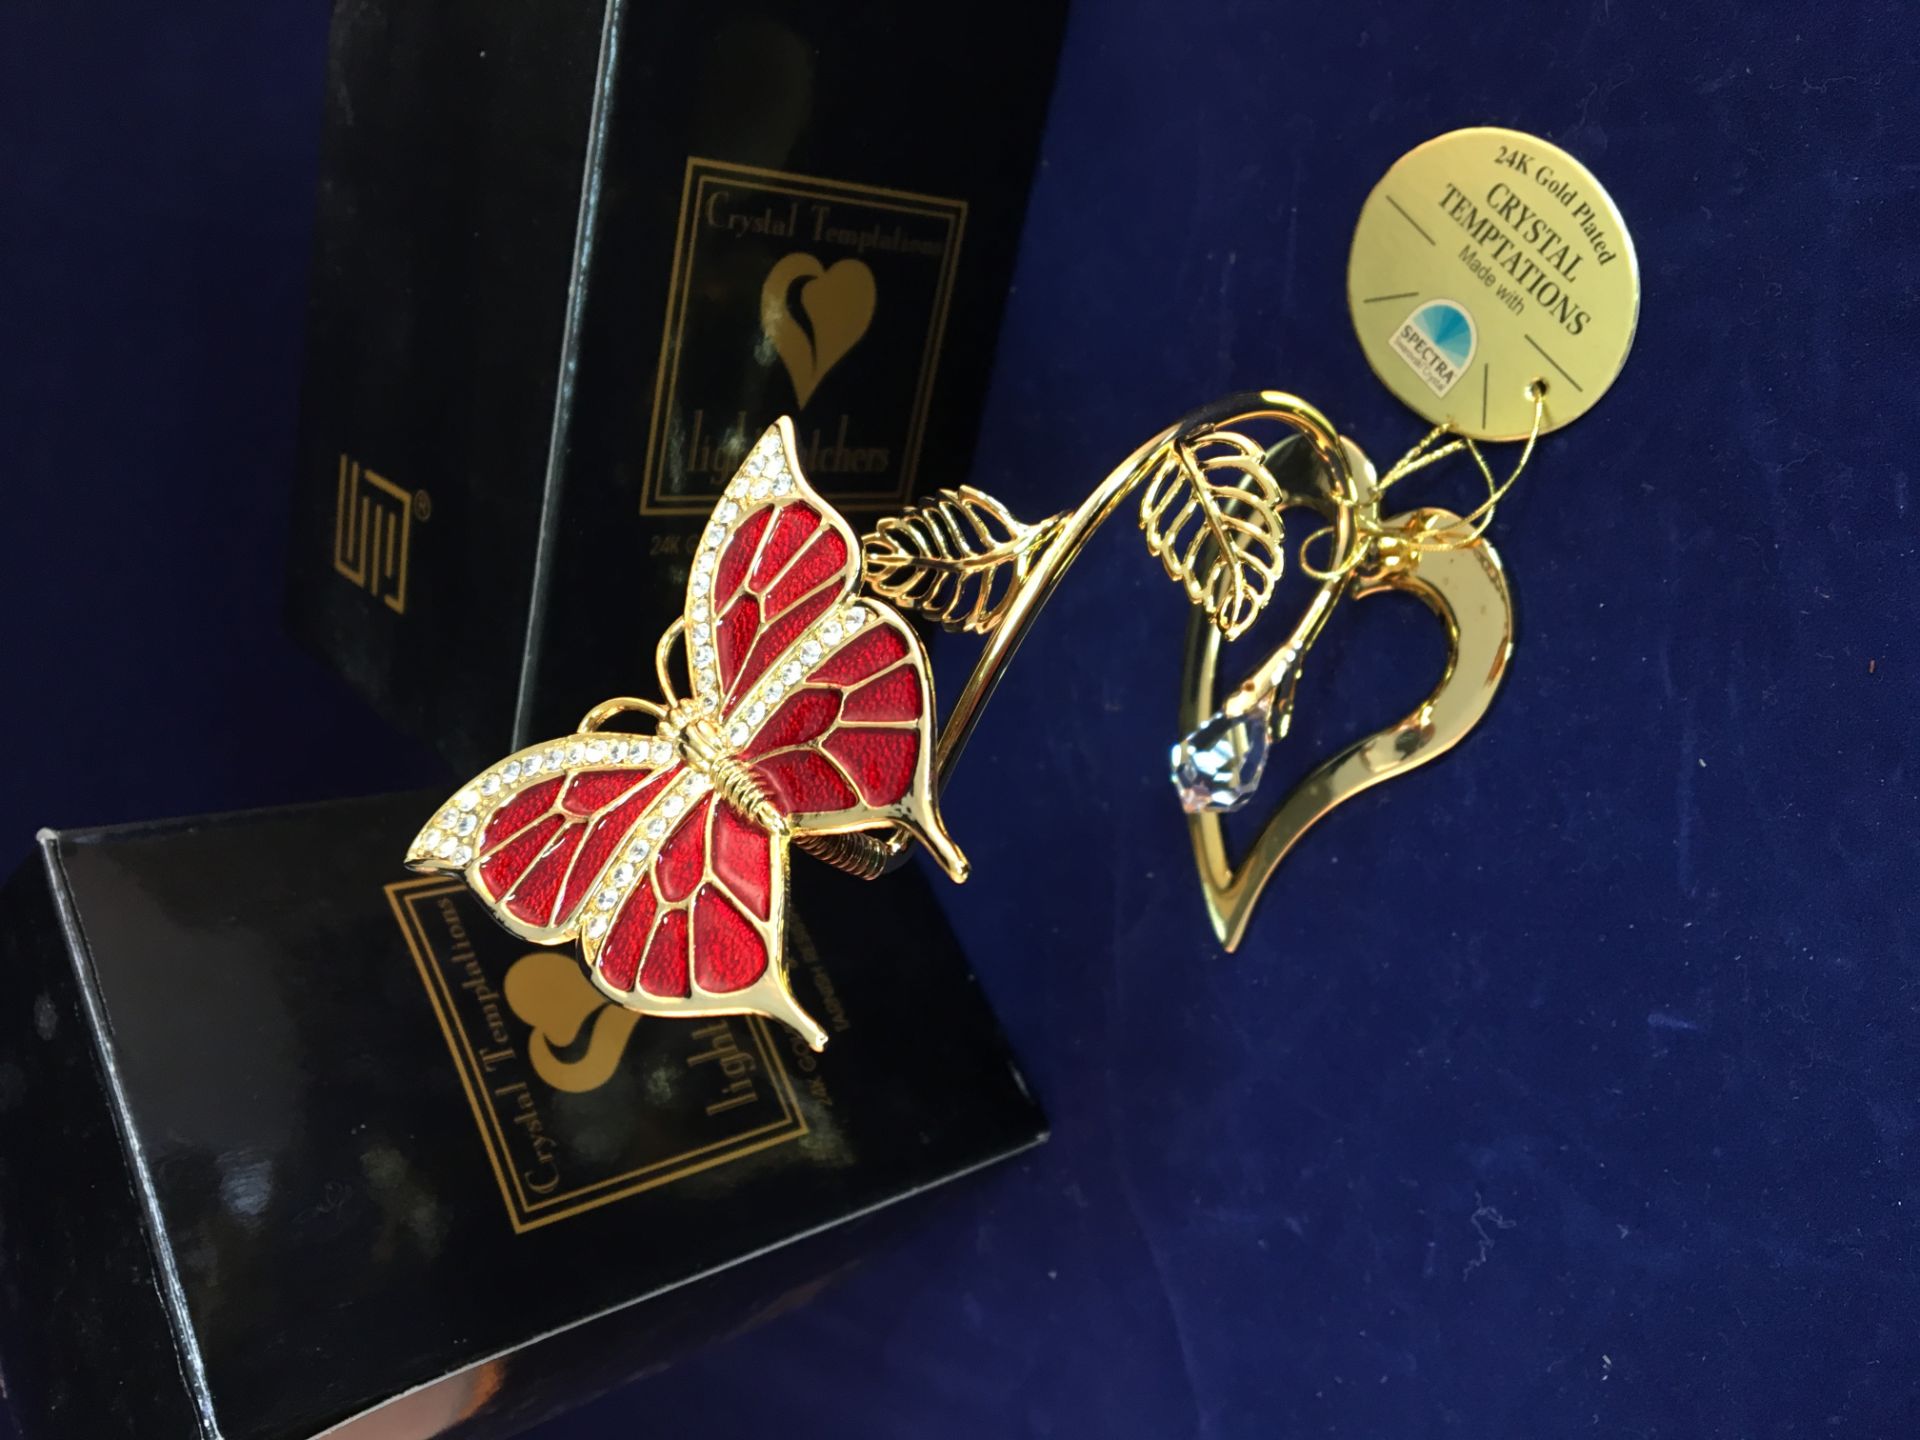 BRAND NEW (WHOLESALE CLEARANCE) LOT OF TWO 24K GOLD PLATED SWAROVSKI CRYSTAL TEMPTATIONS LIGHT